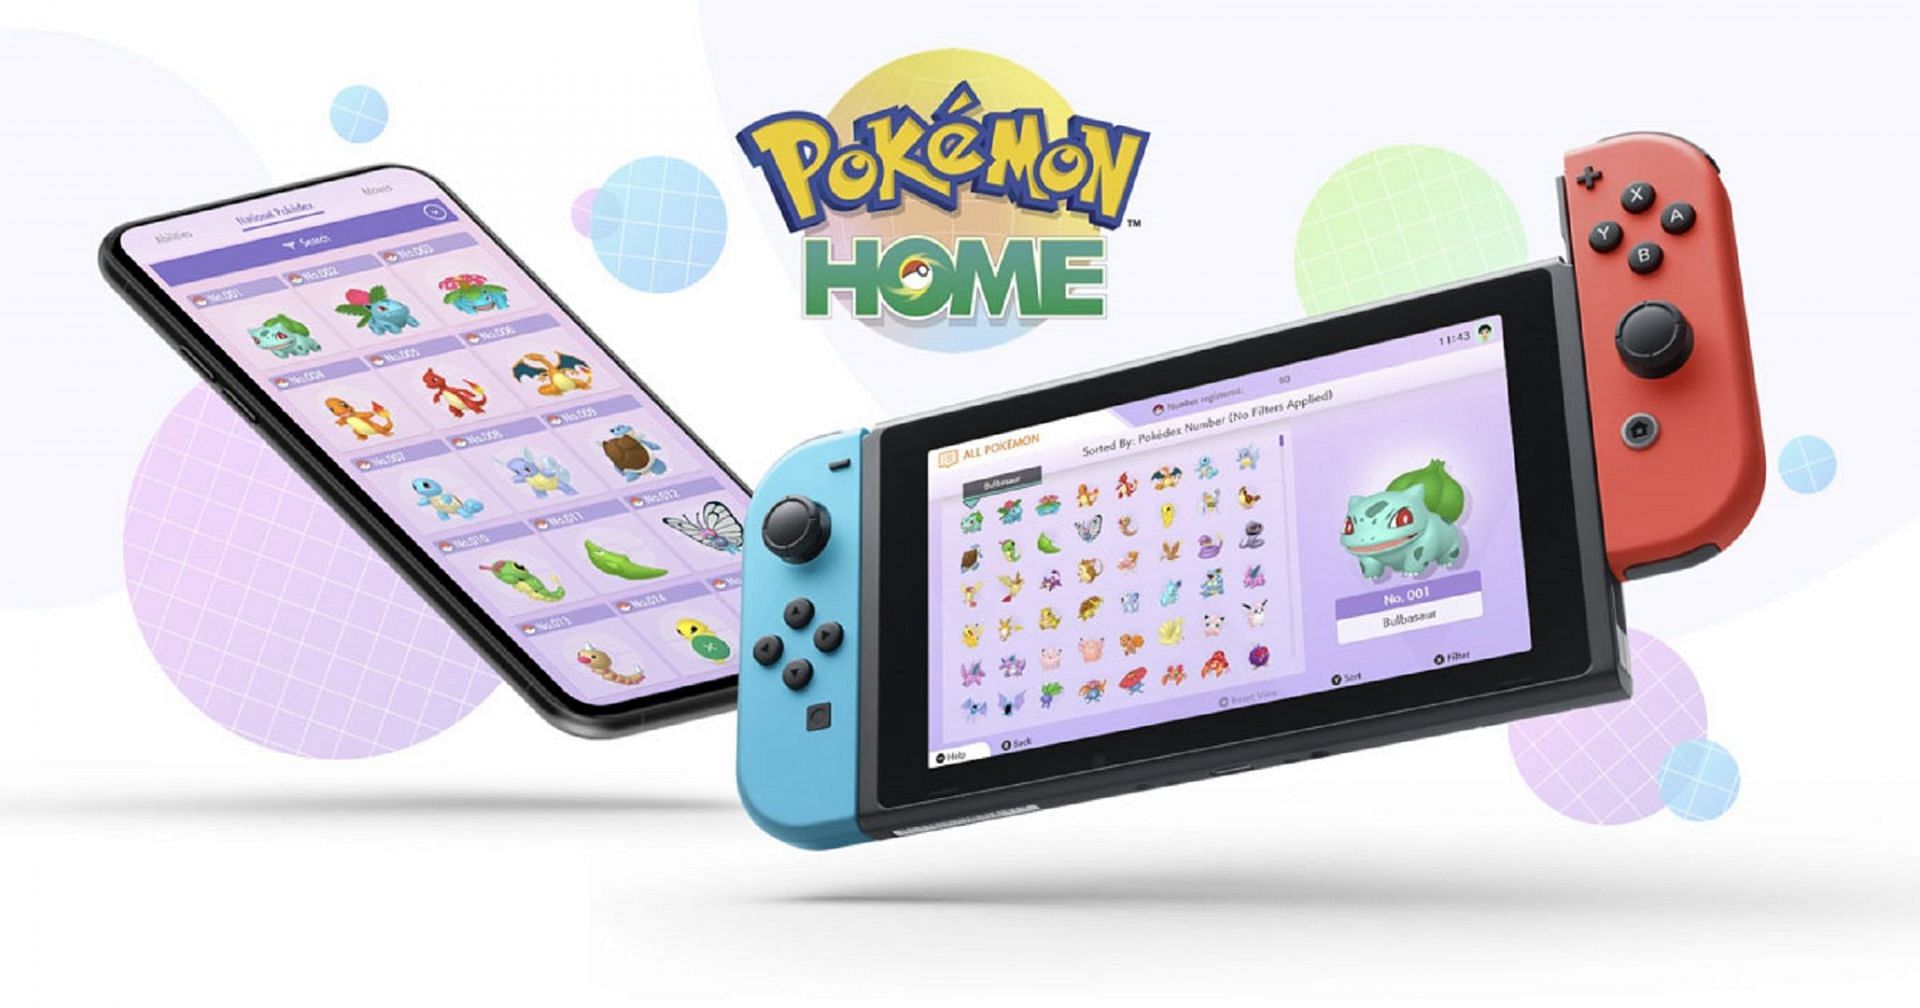 Pokemon Home will have a sizable role in Scarlet and Violet according to leakers (Image via The Pokemon Company)